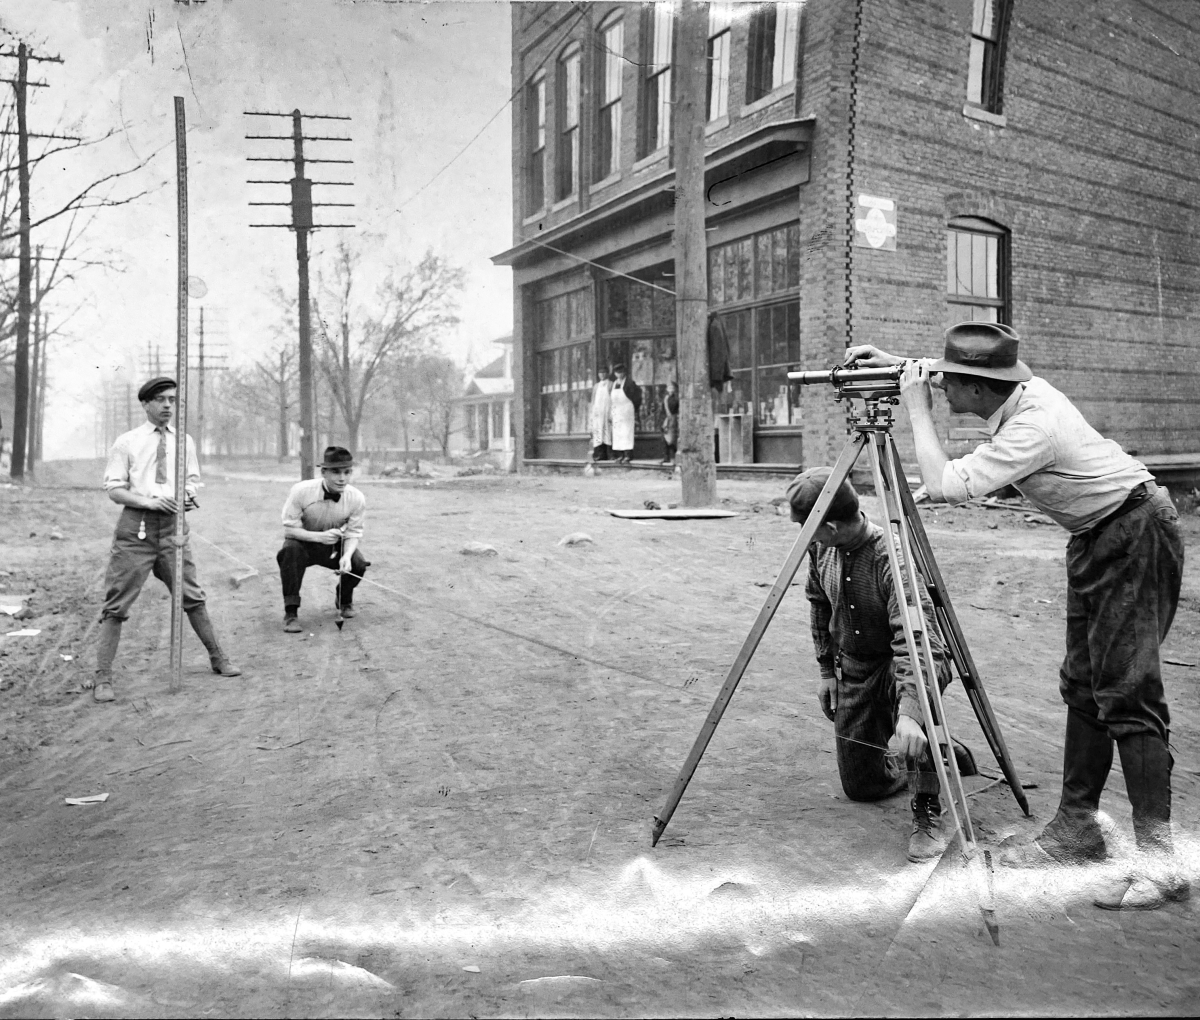 A black and white photo of surveyors in the late 19th century